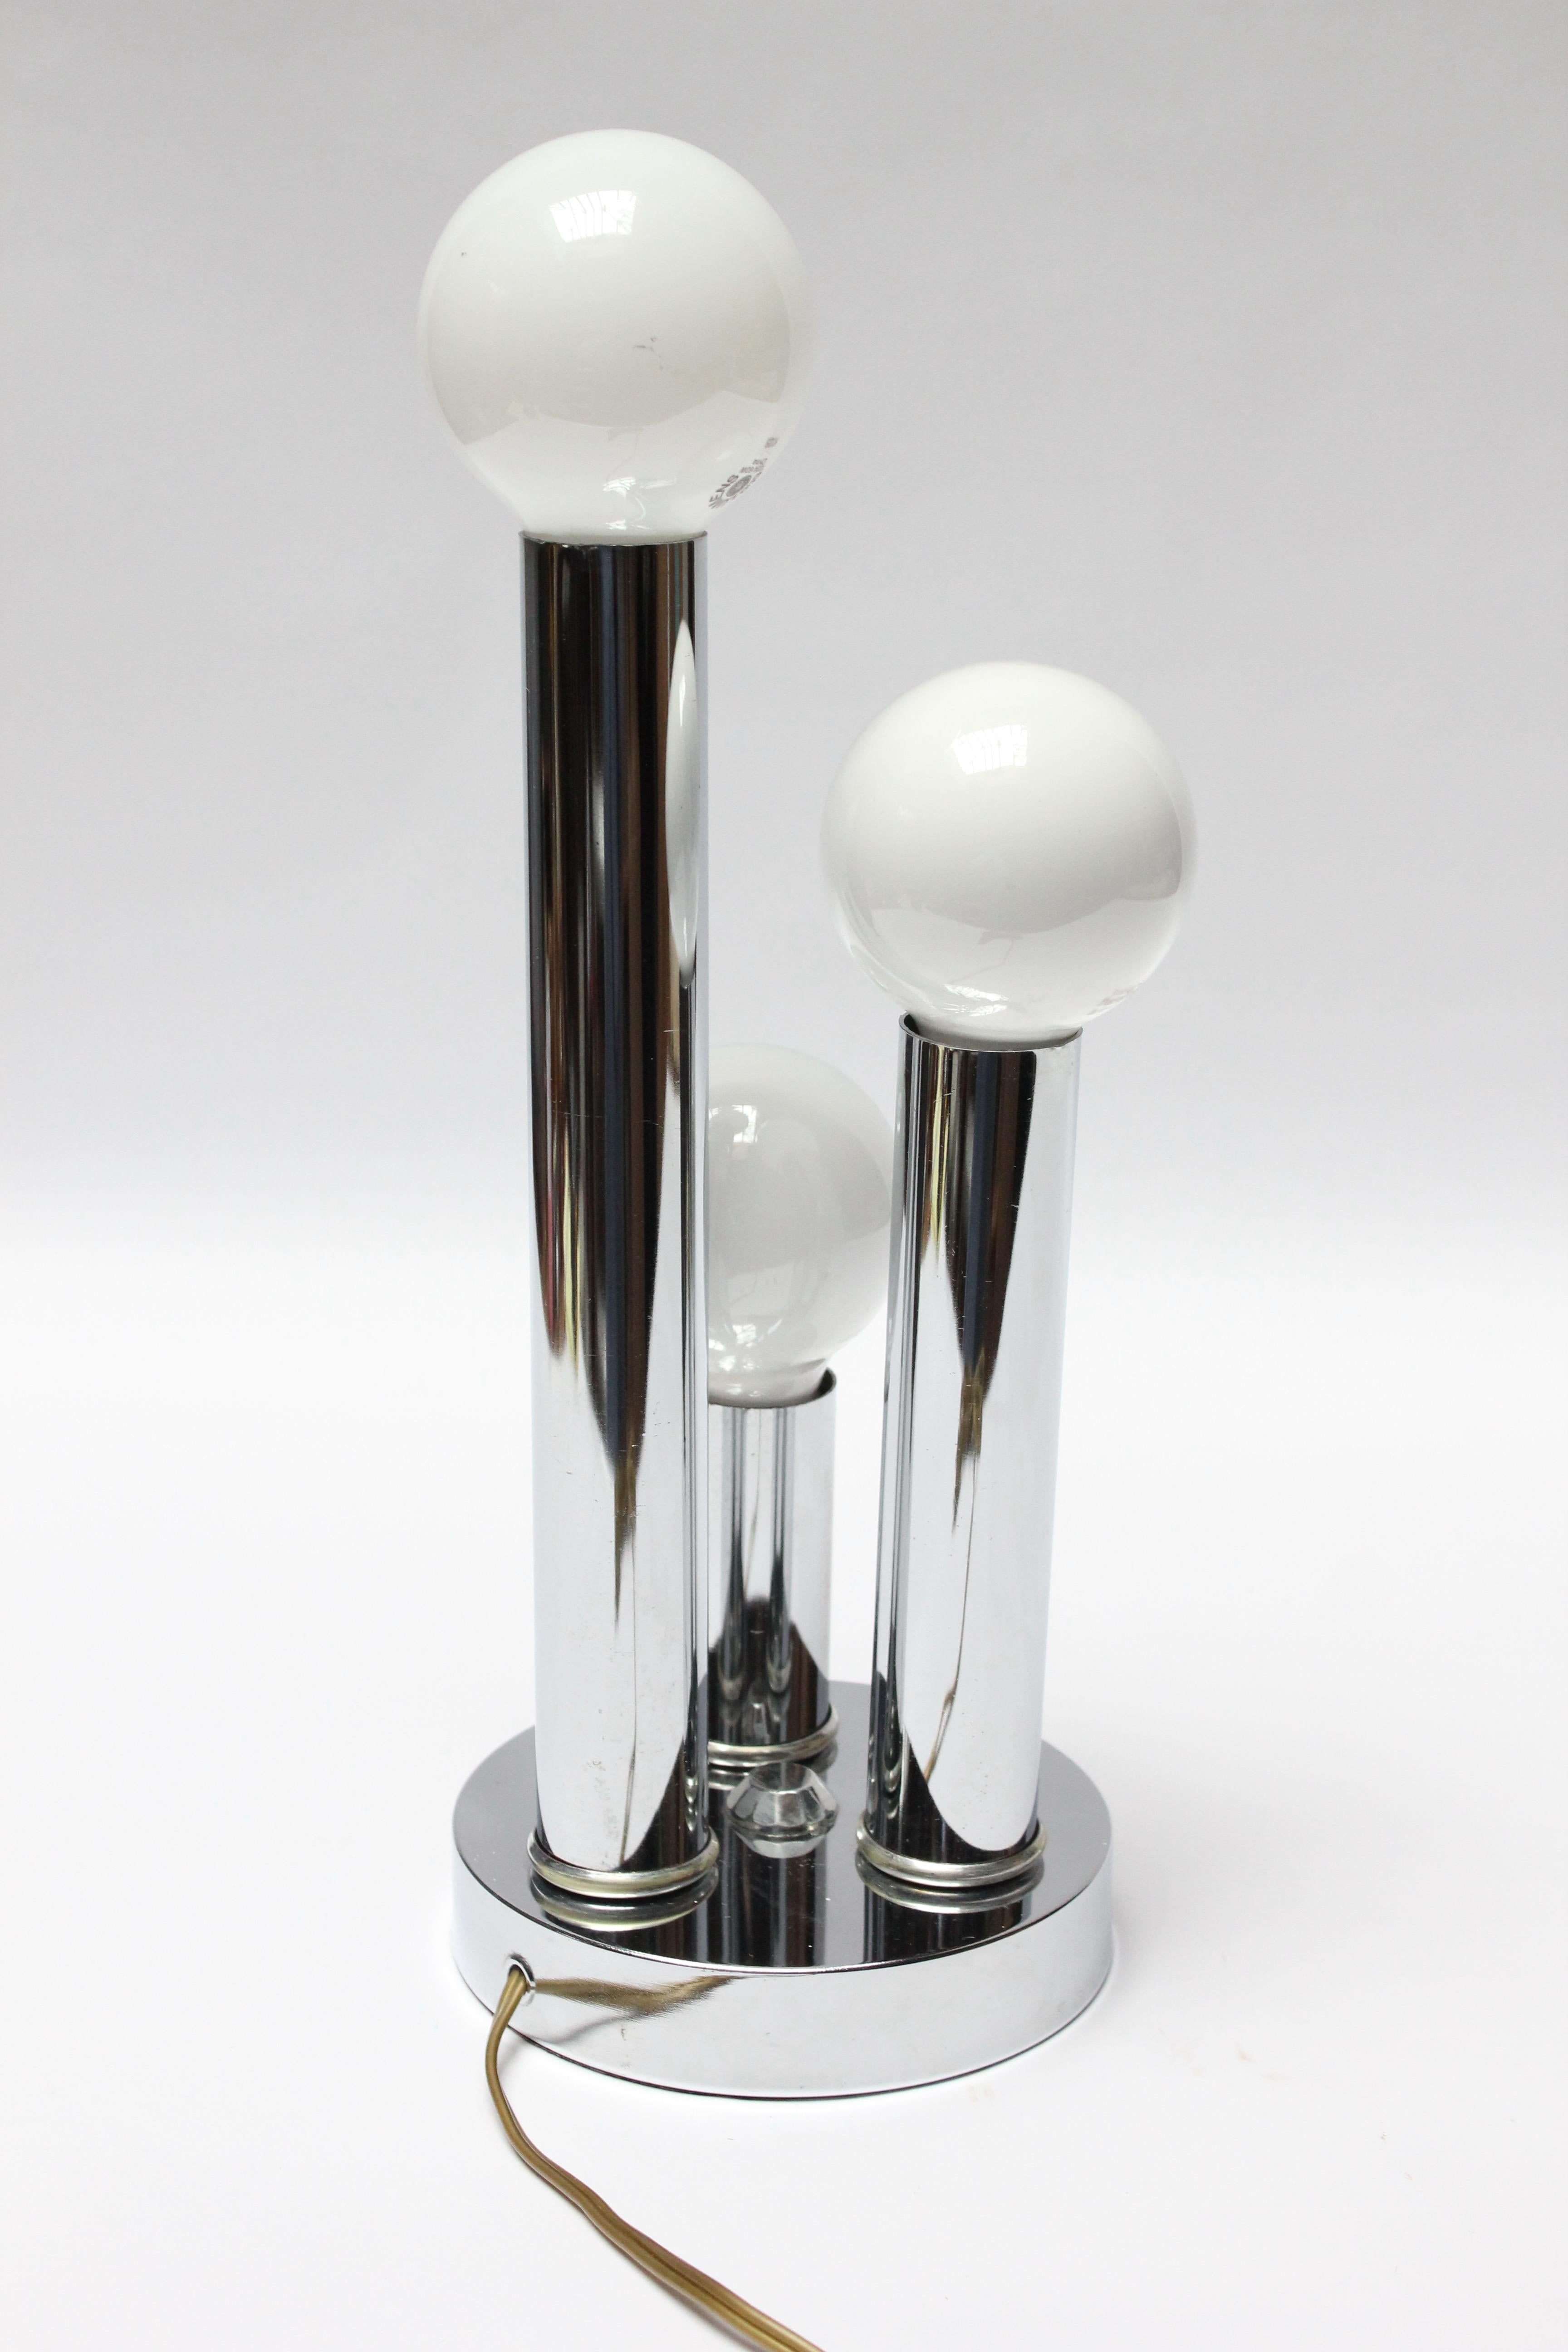 Mid-century three fixture/3-way lamp with three elongated cylindrical chrome pillars supported by a round base. Orb bulbs can be replaced, if another shape is desired. 
Light wear present to the polished chrome; overall, very good, vintage